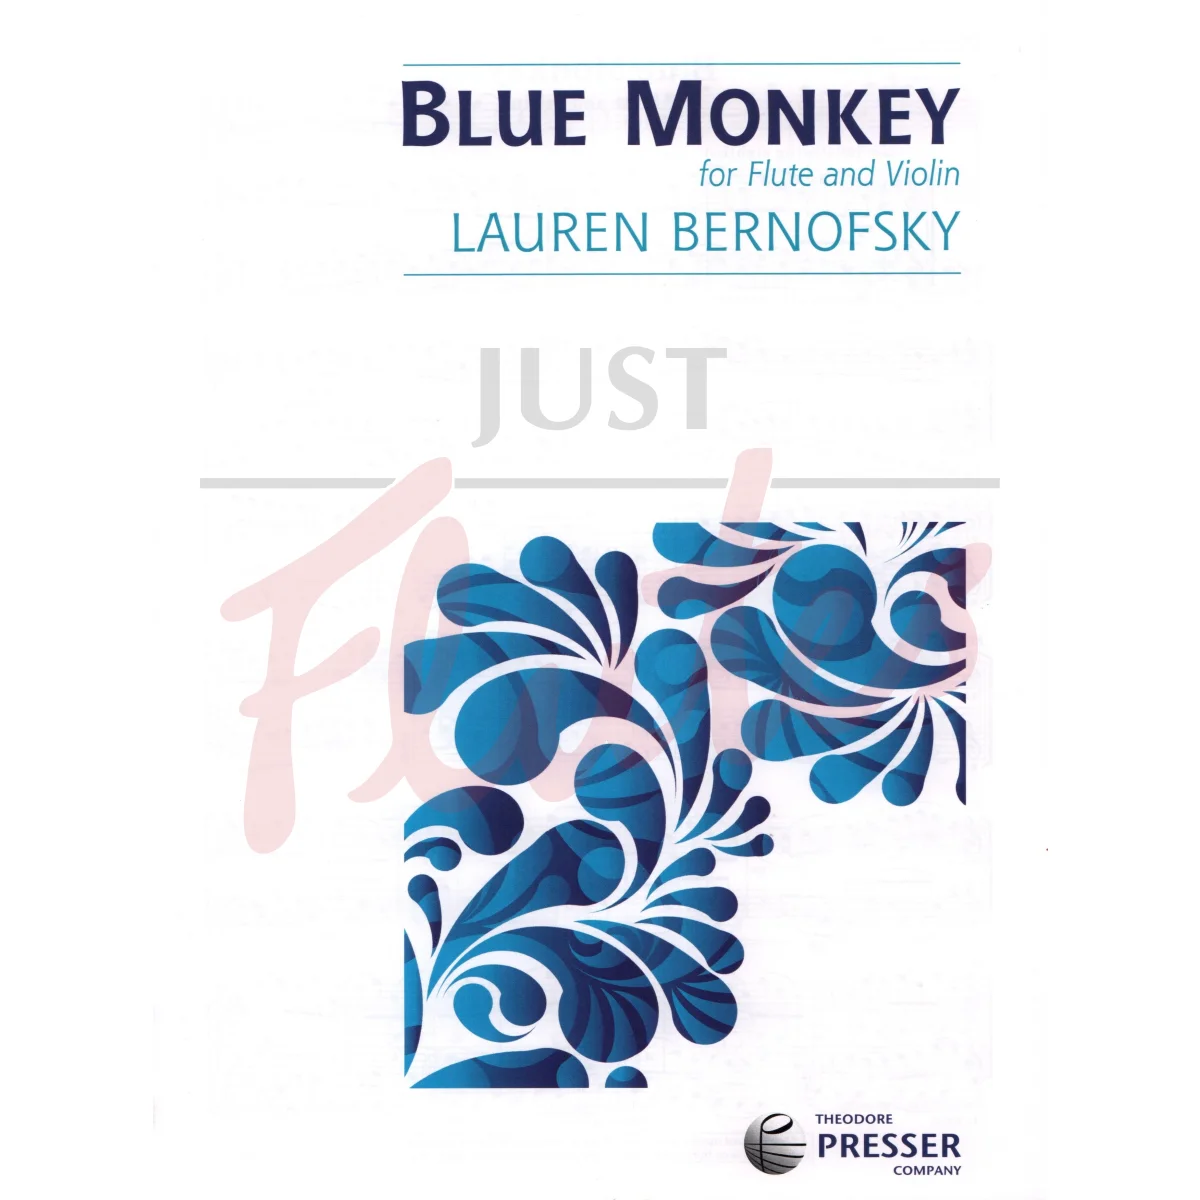 Blue Monkey for Flute and Violin